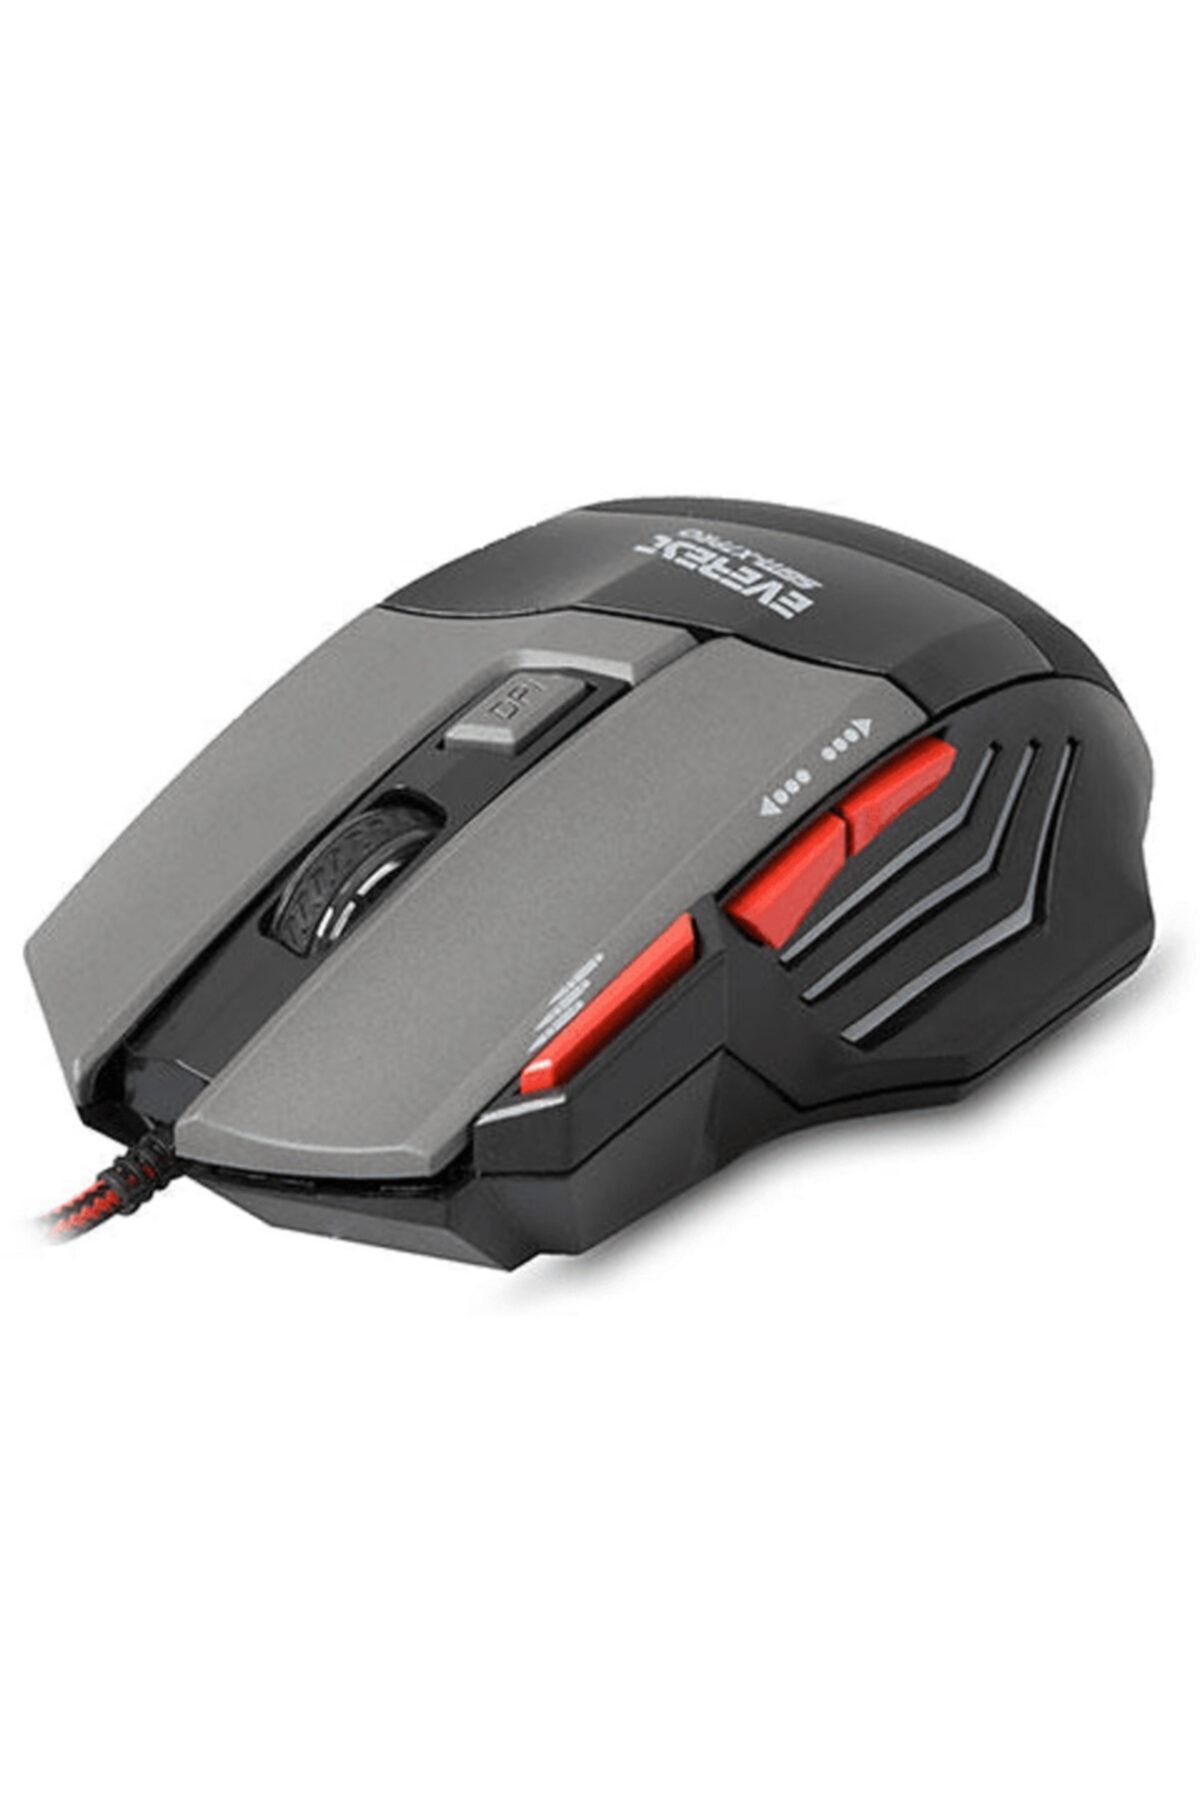 Everest Sgm-x7 Pro Gaming Mouse Pad Ve Oyuncu Mouse